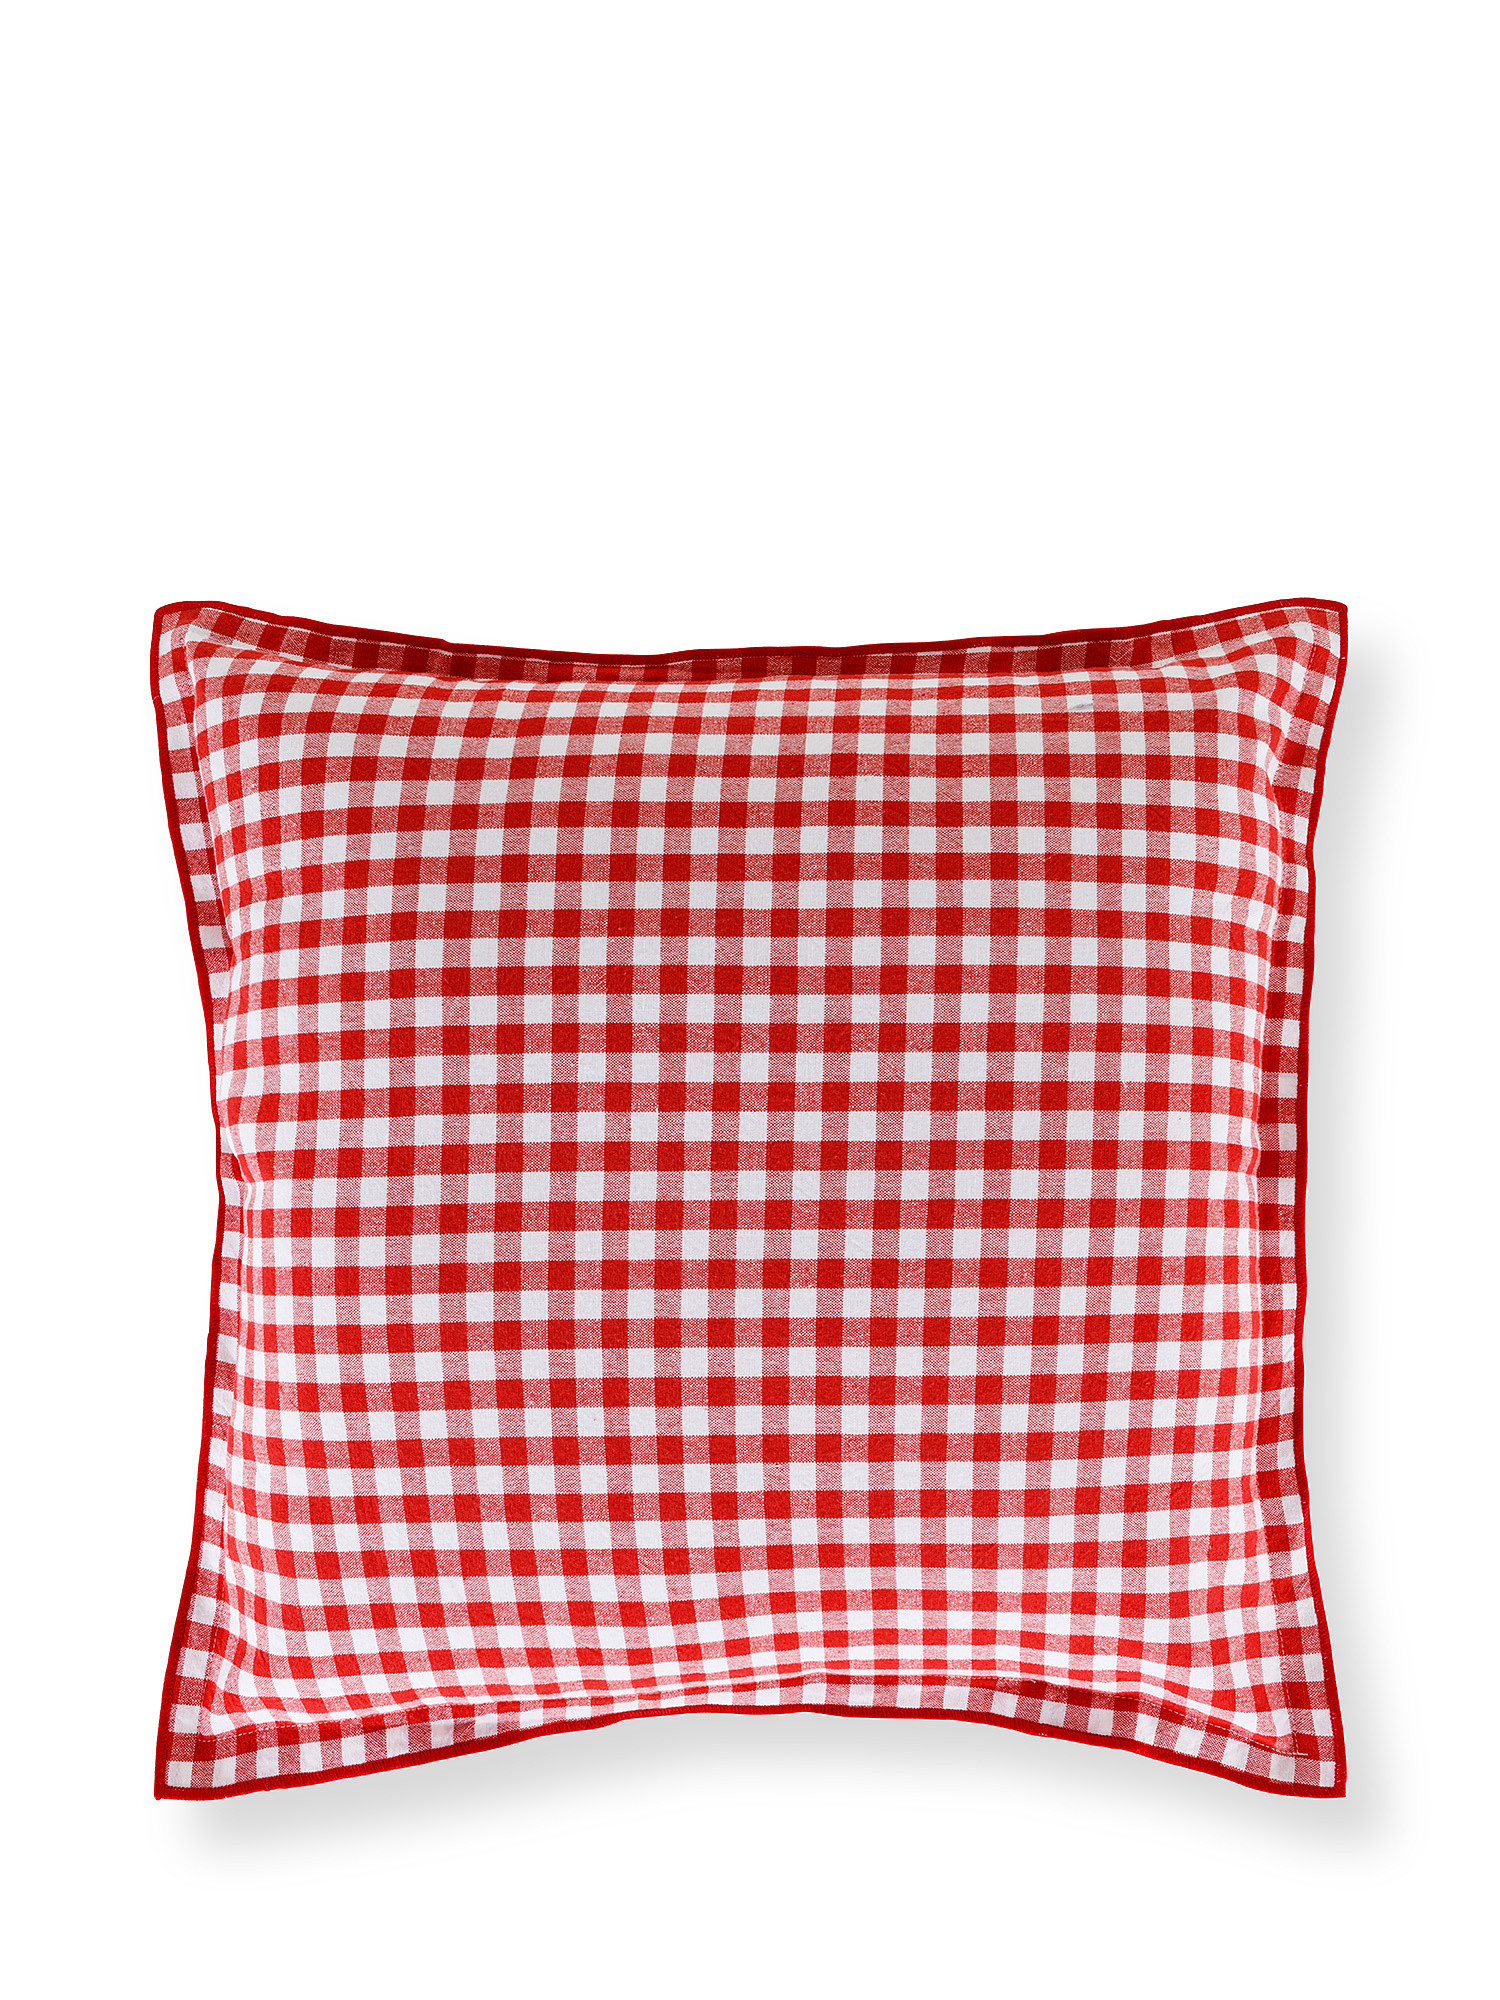 Cuscino cotone motivo vichy 45x45cm, Rosso, large image number 0